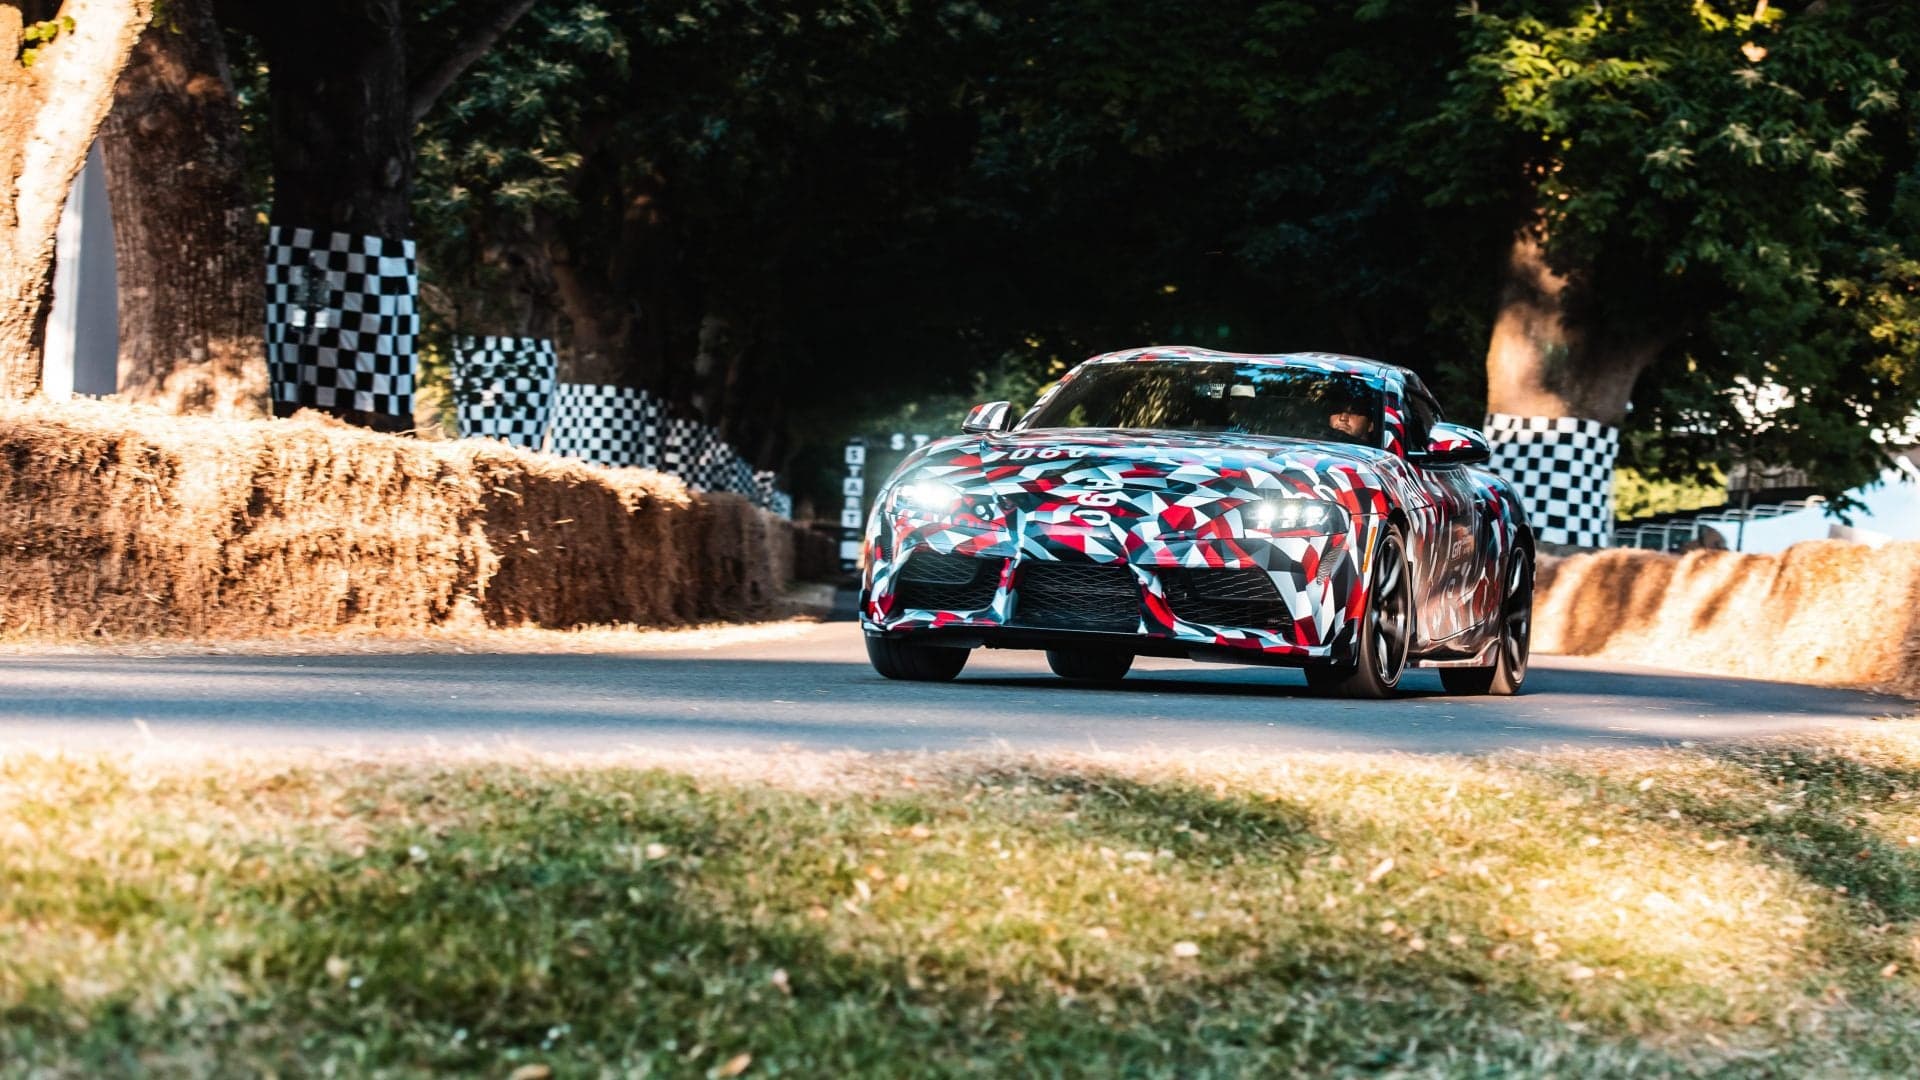 Toyota Engineer Says New Supra Can Be Sold in Manual if Market Demands